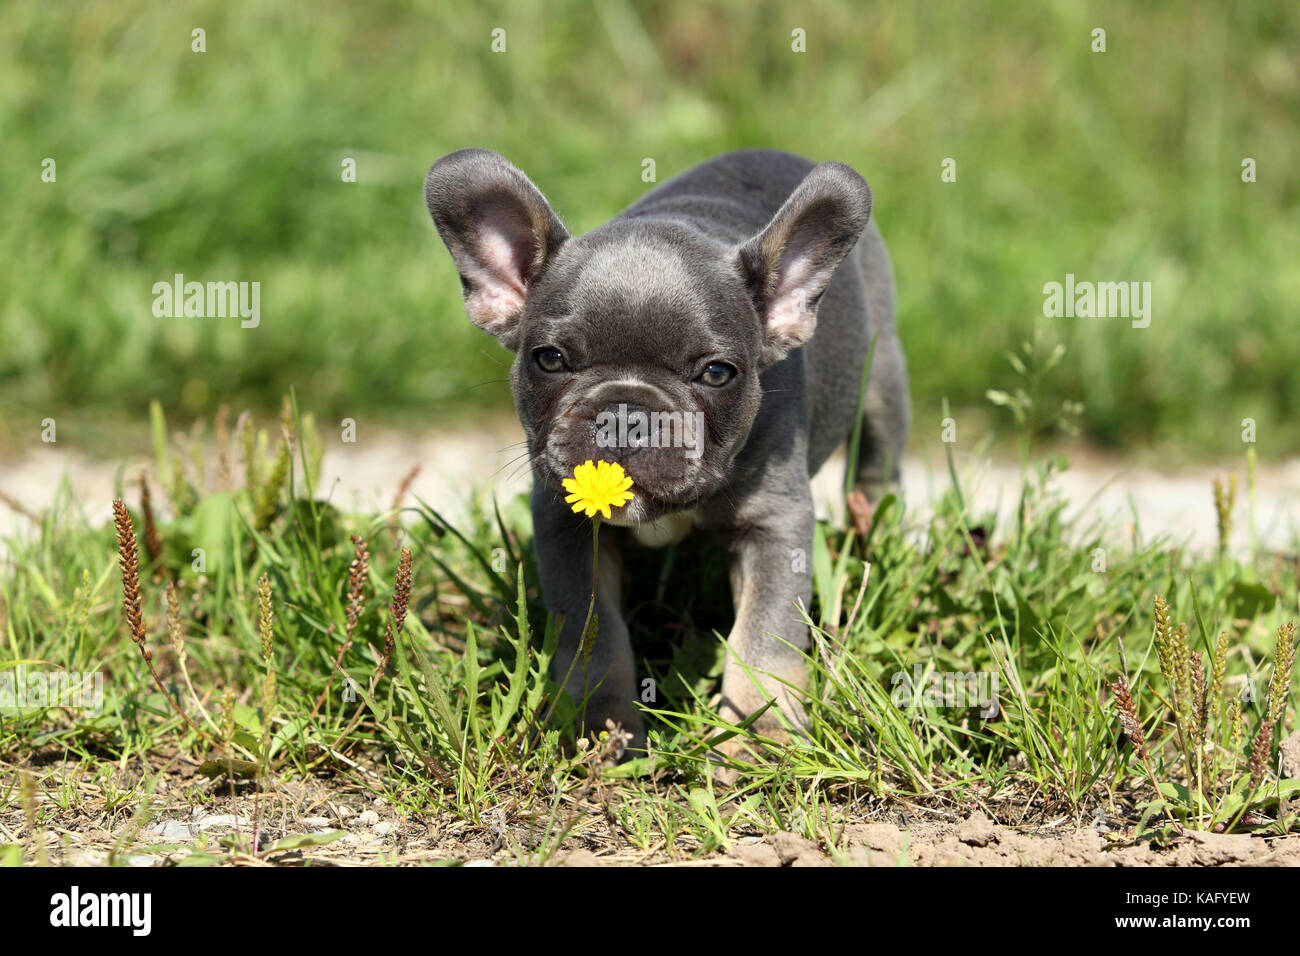 French Bulldog. Puppy (6 weeks old) sniffing at a yellow flower. Germany Stock Photo